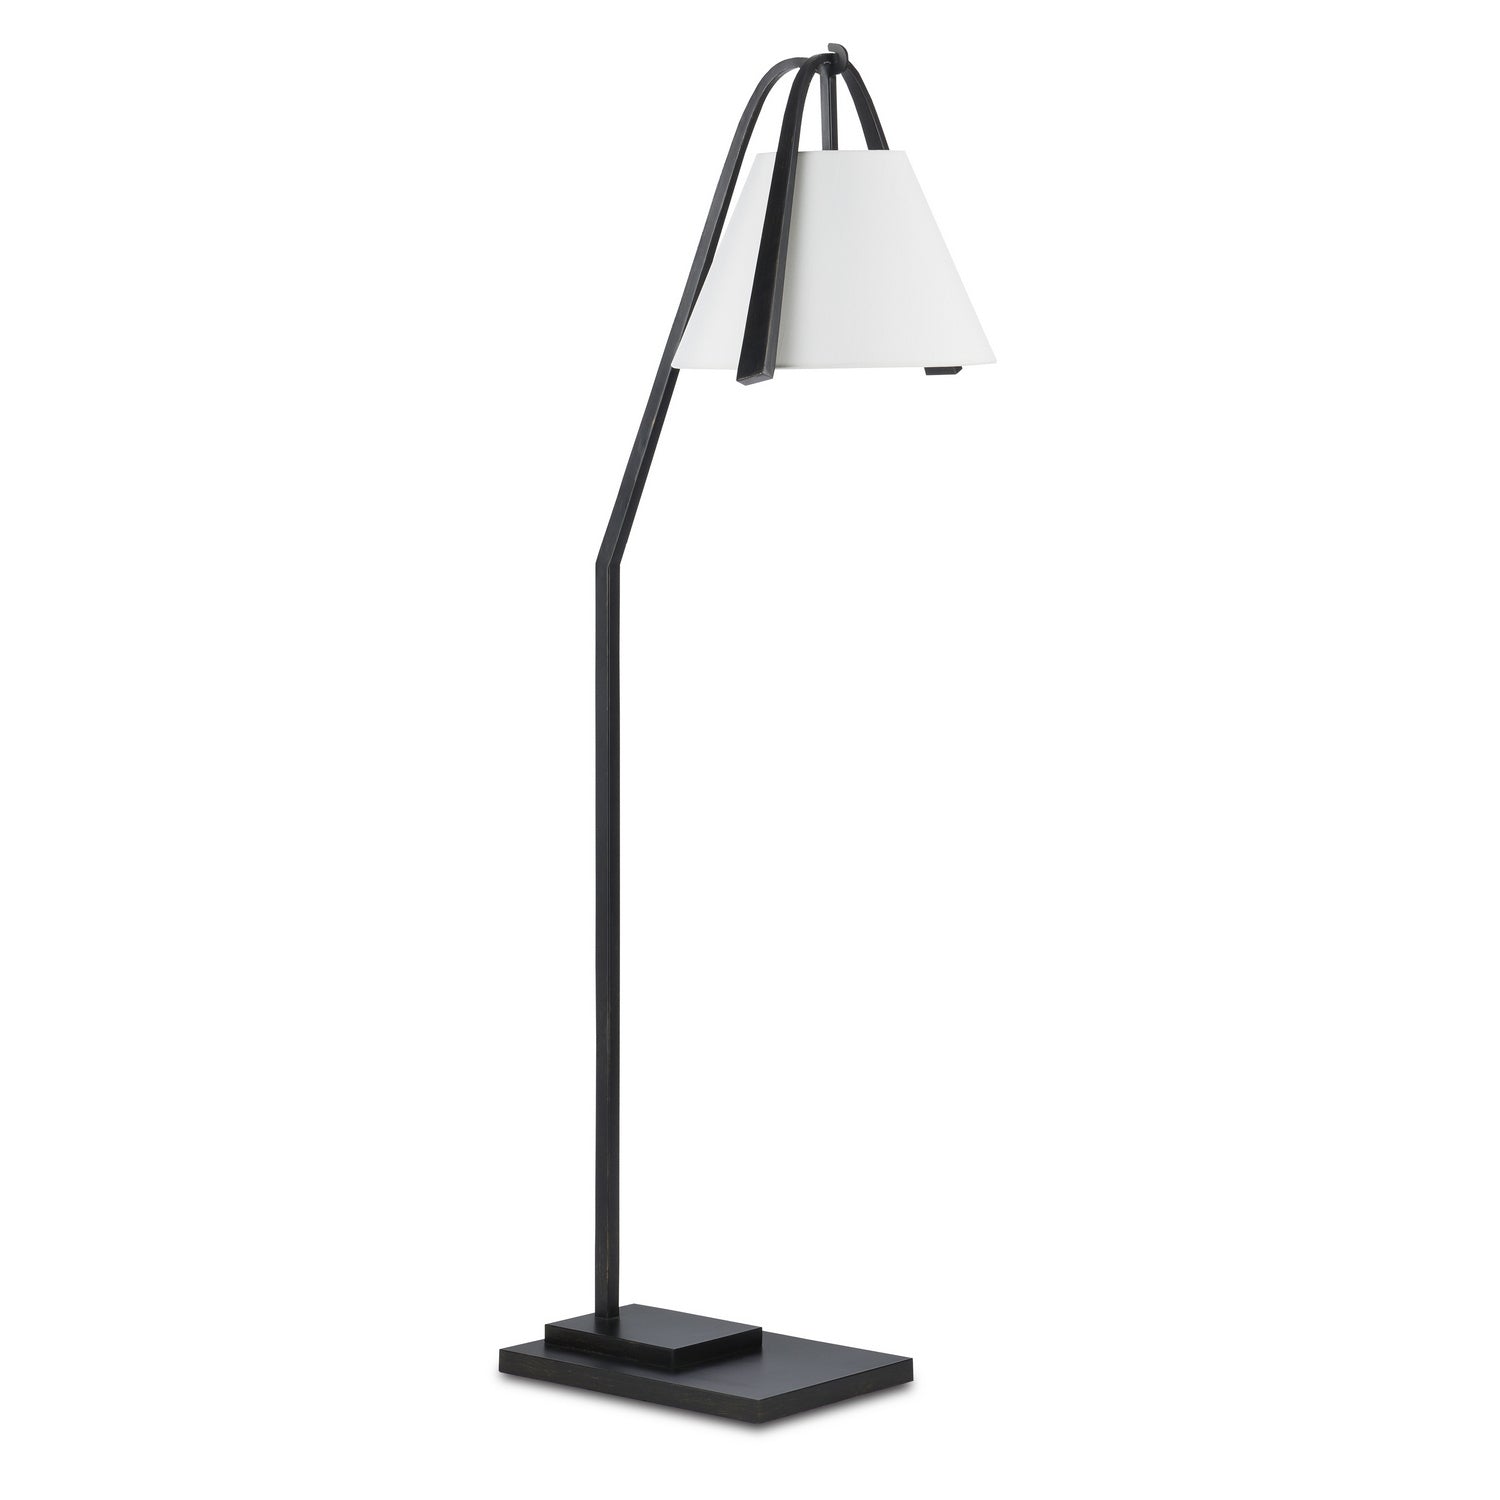 One Light Floor Lamp from the Frey collection in Satin Black/Brushed Brown finish